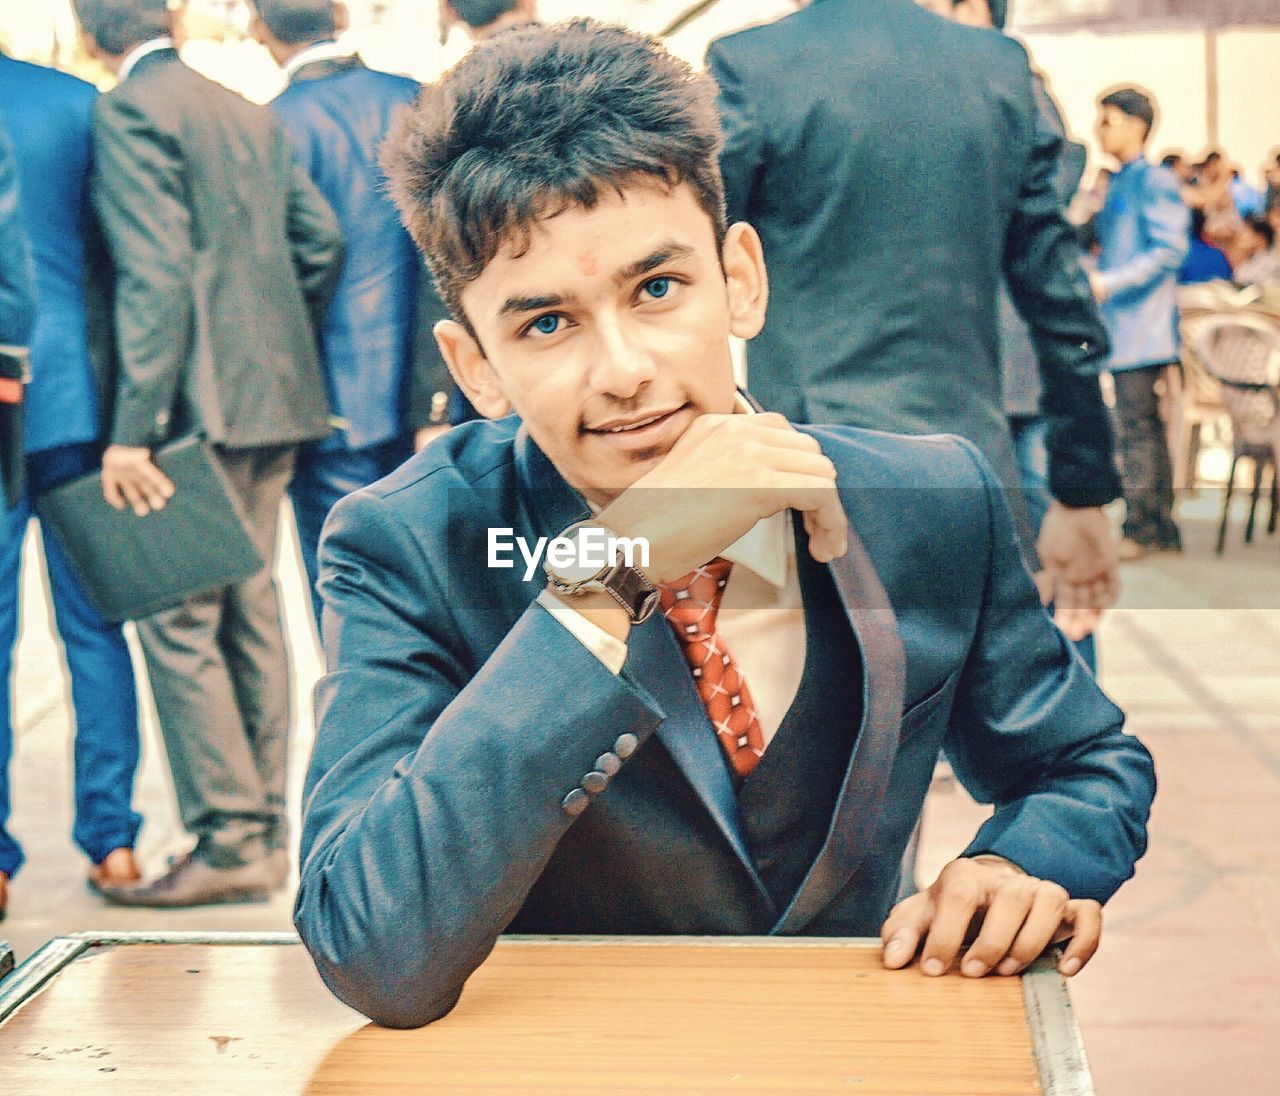 Portrait of teenage boy wearing suit sitting at table